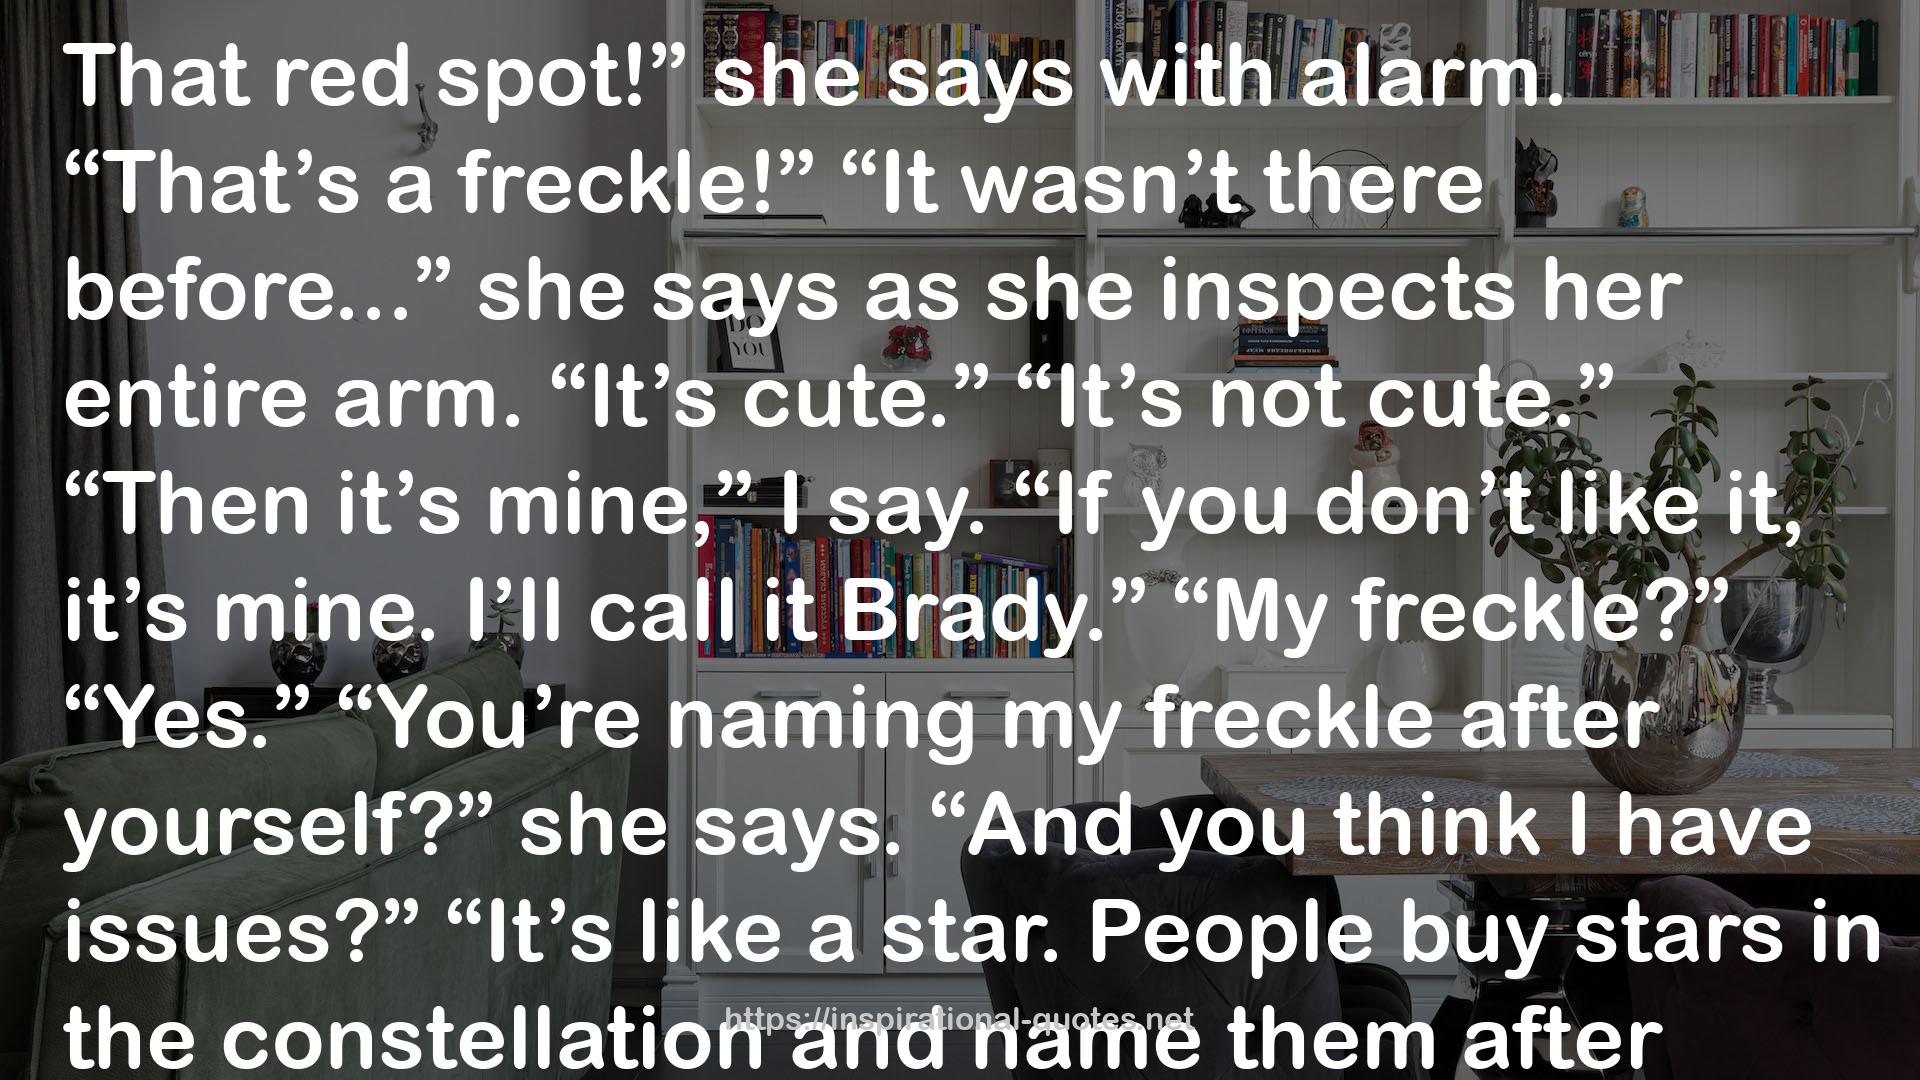 a freckle!”“It  QUOTES